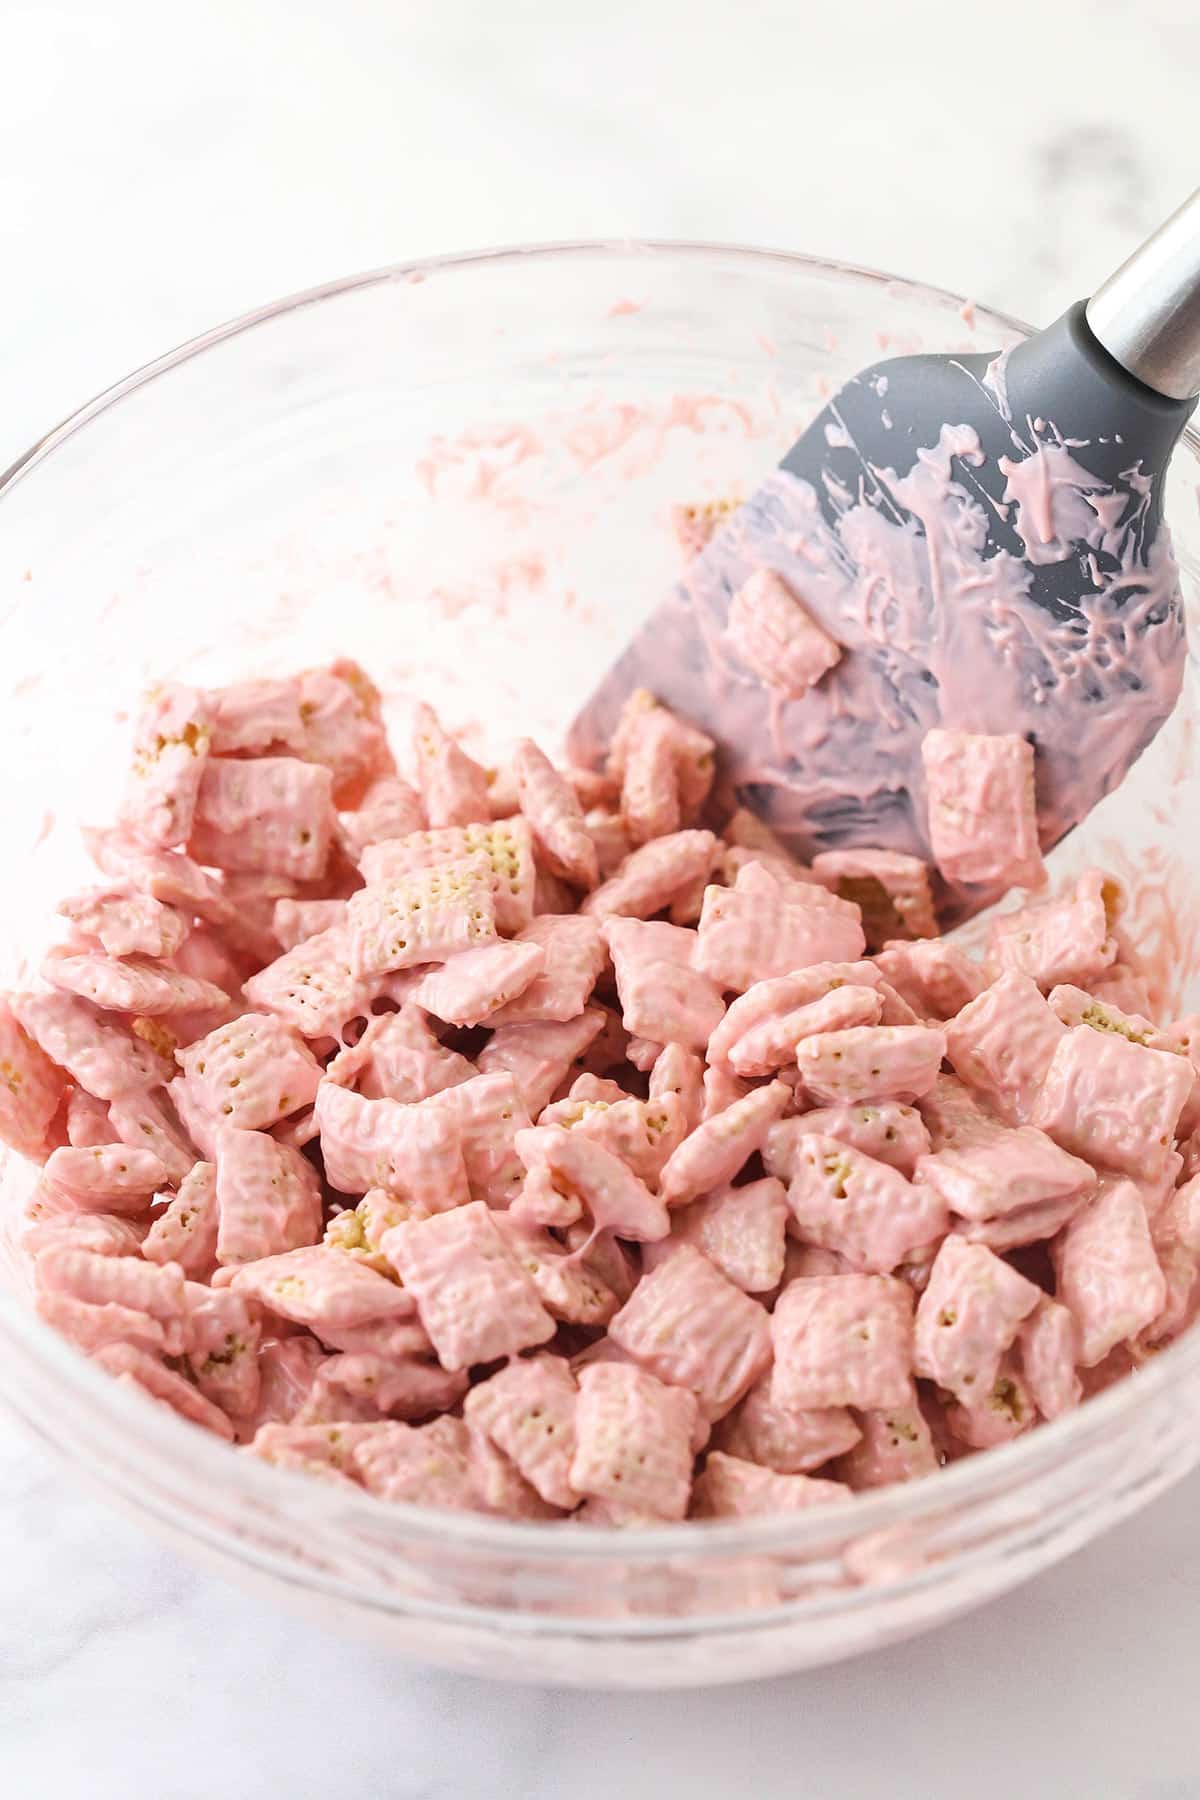 pink melting chocolate being stirred with the rice chex cereal in glass bowl